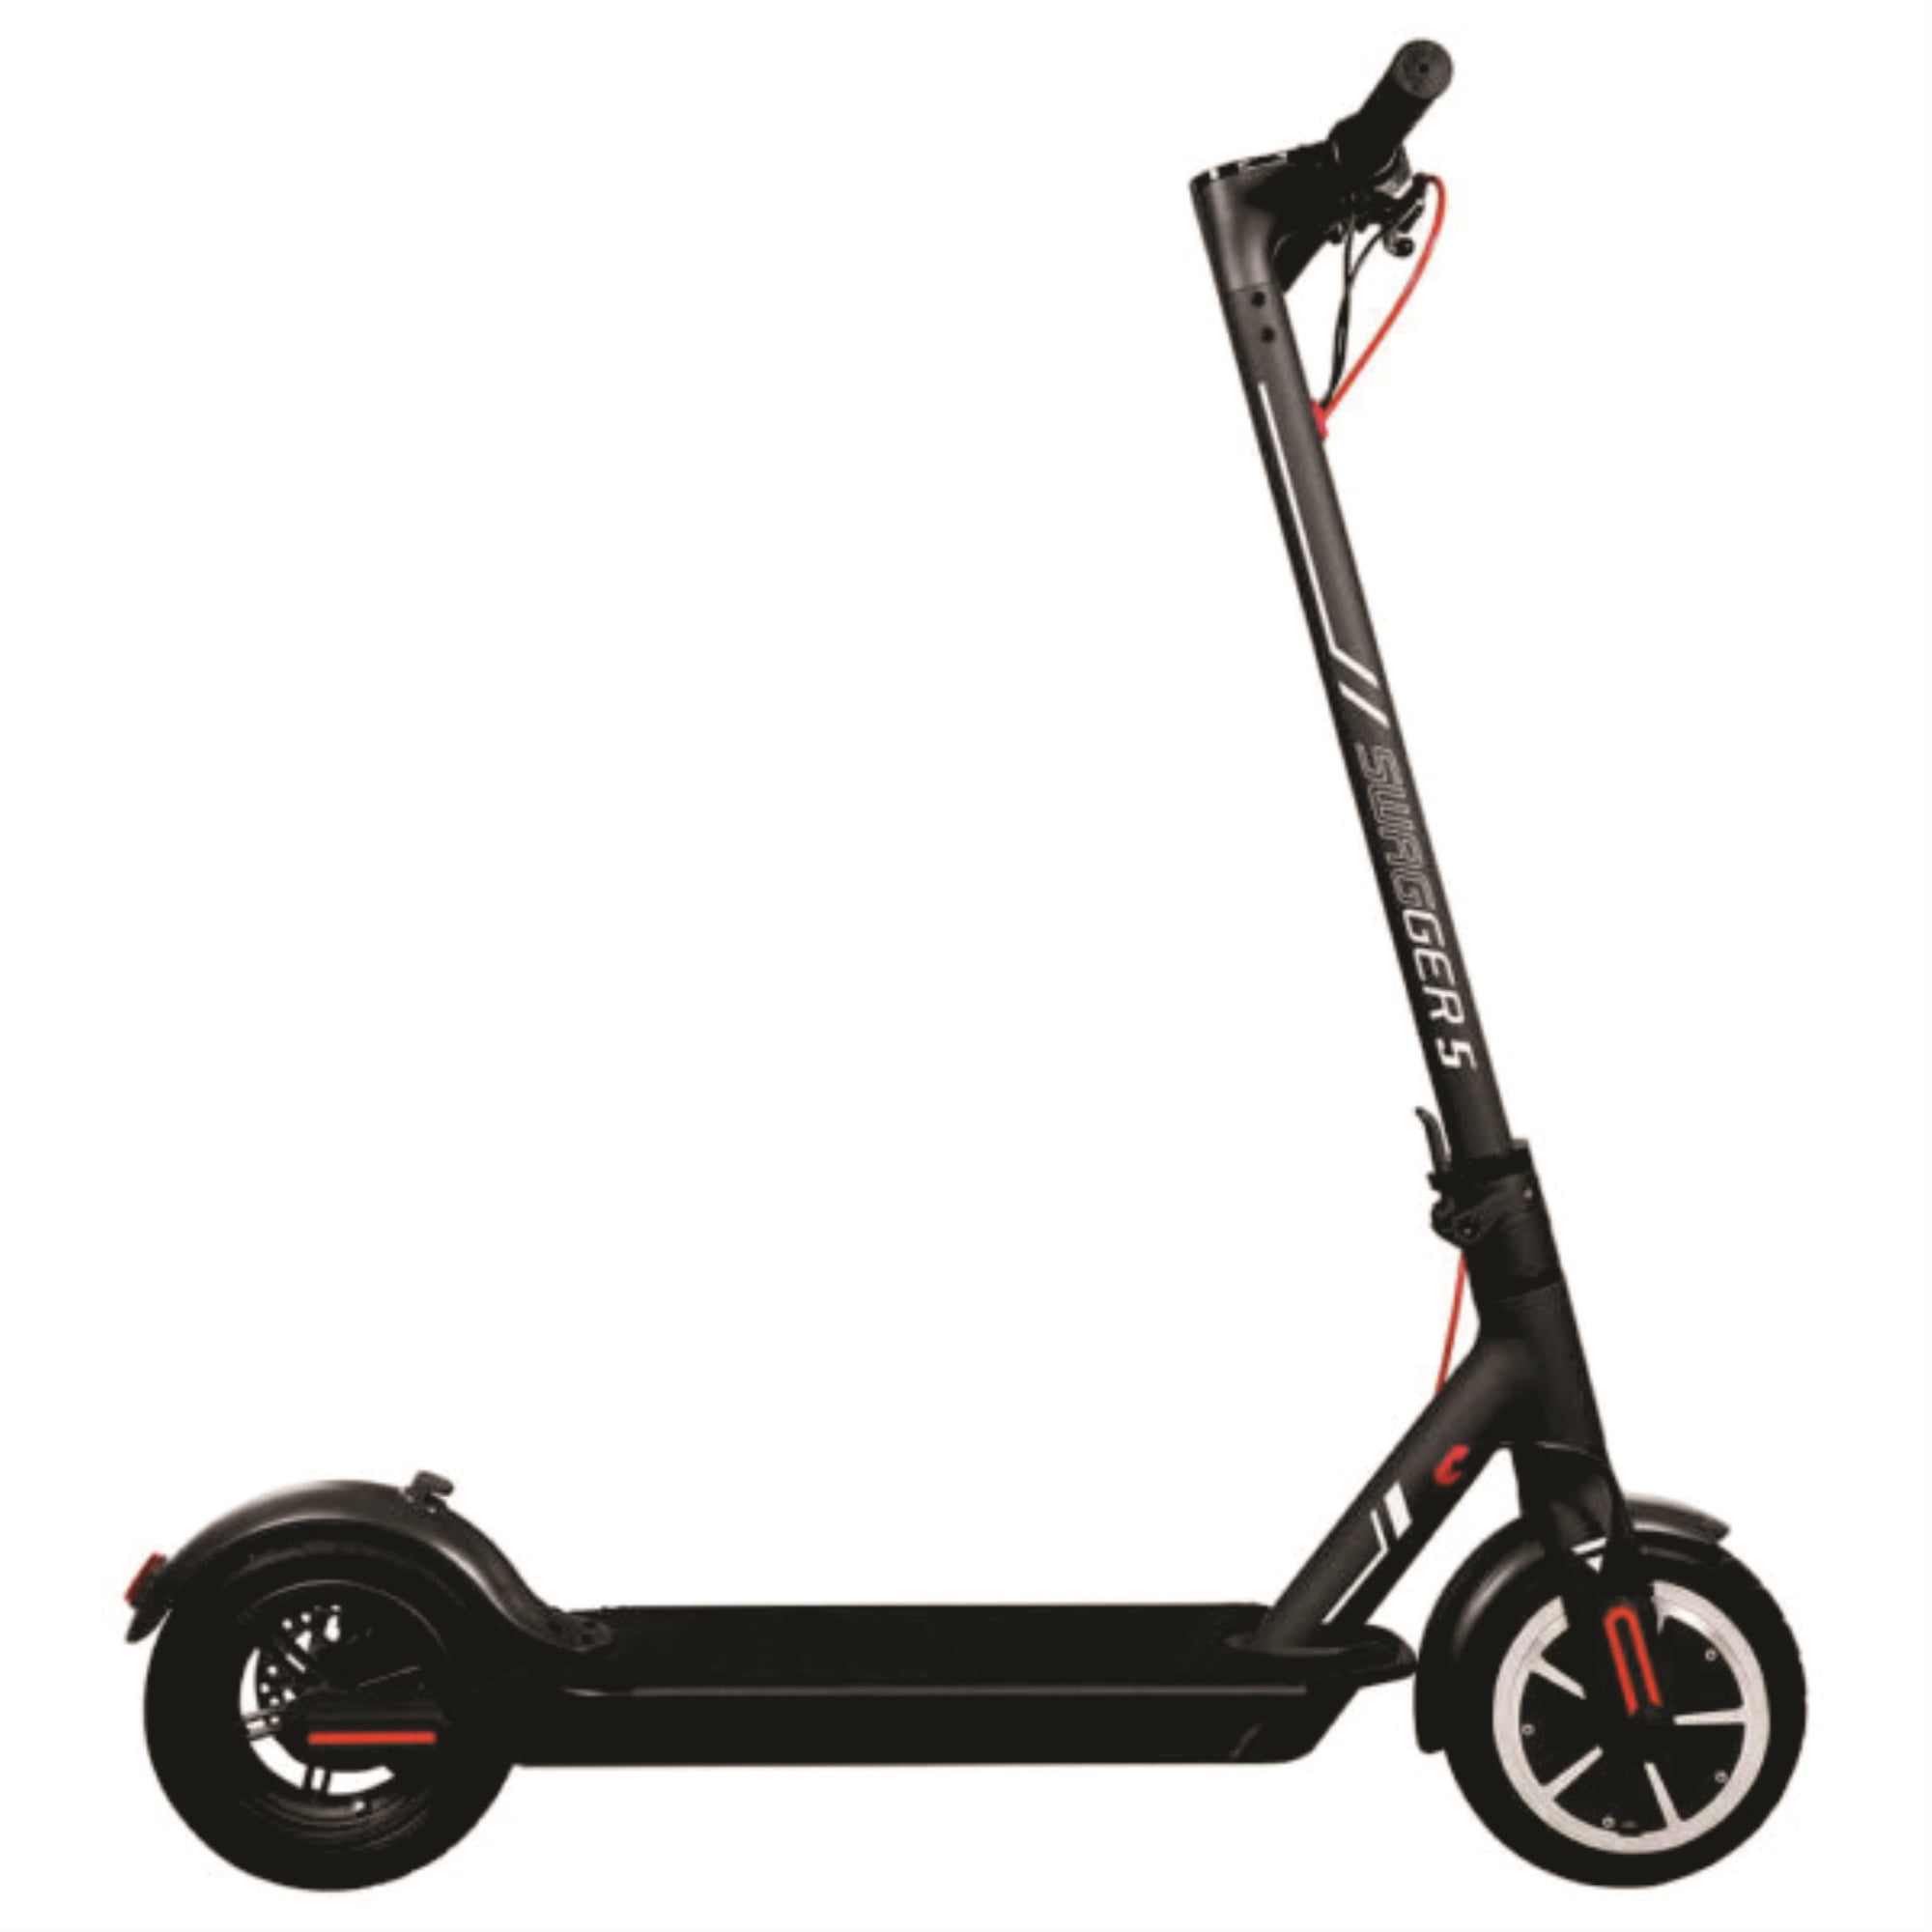 Swagtron - Swagger 5 Elite Electric Scooter: - Walmart.com